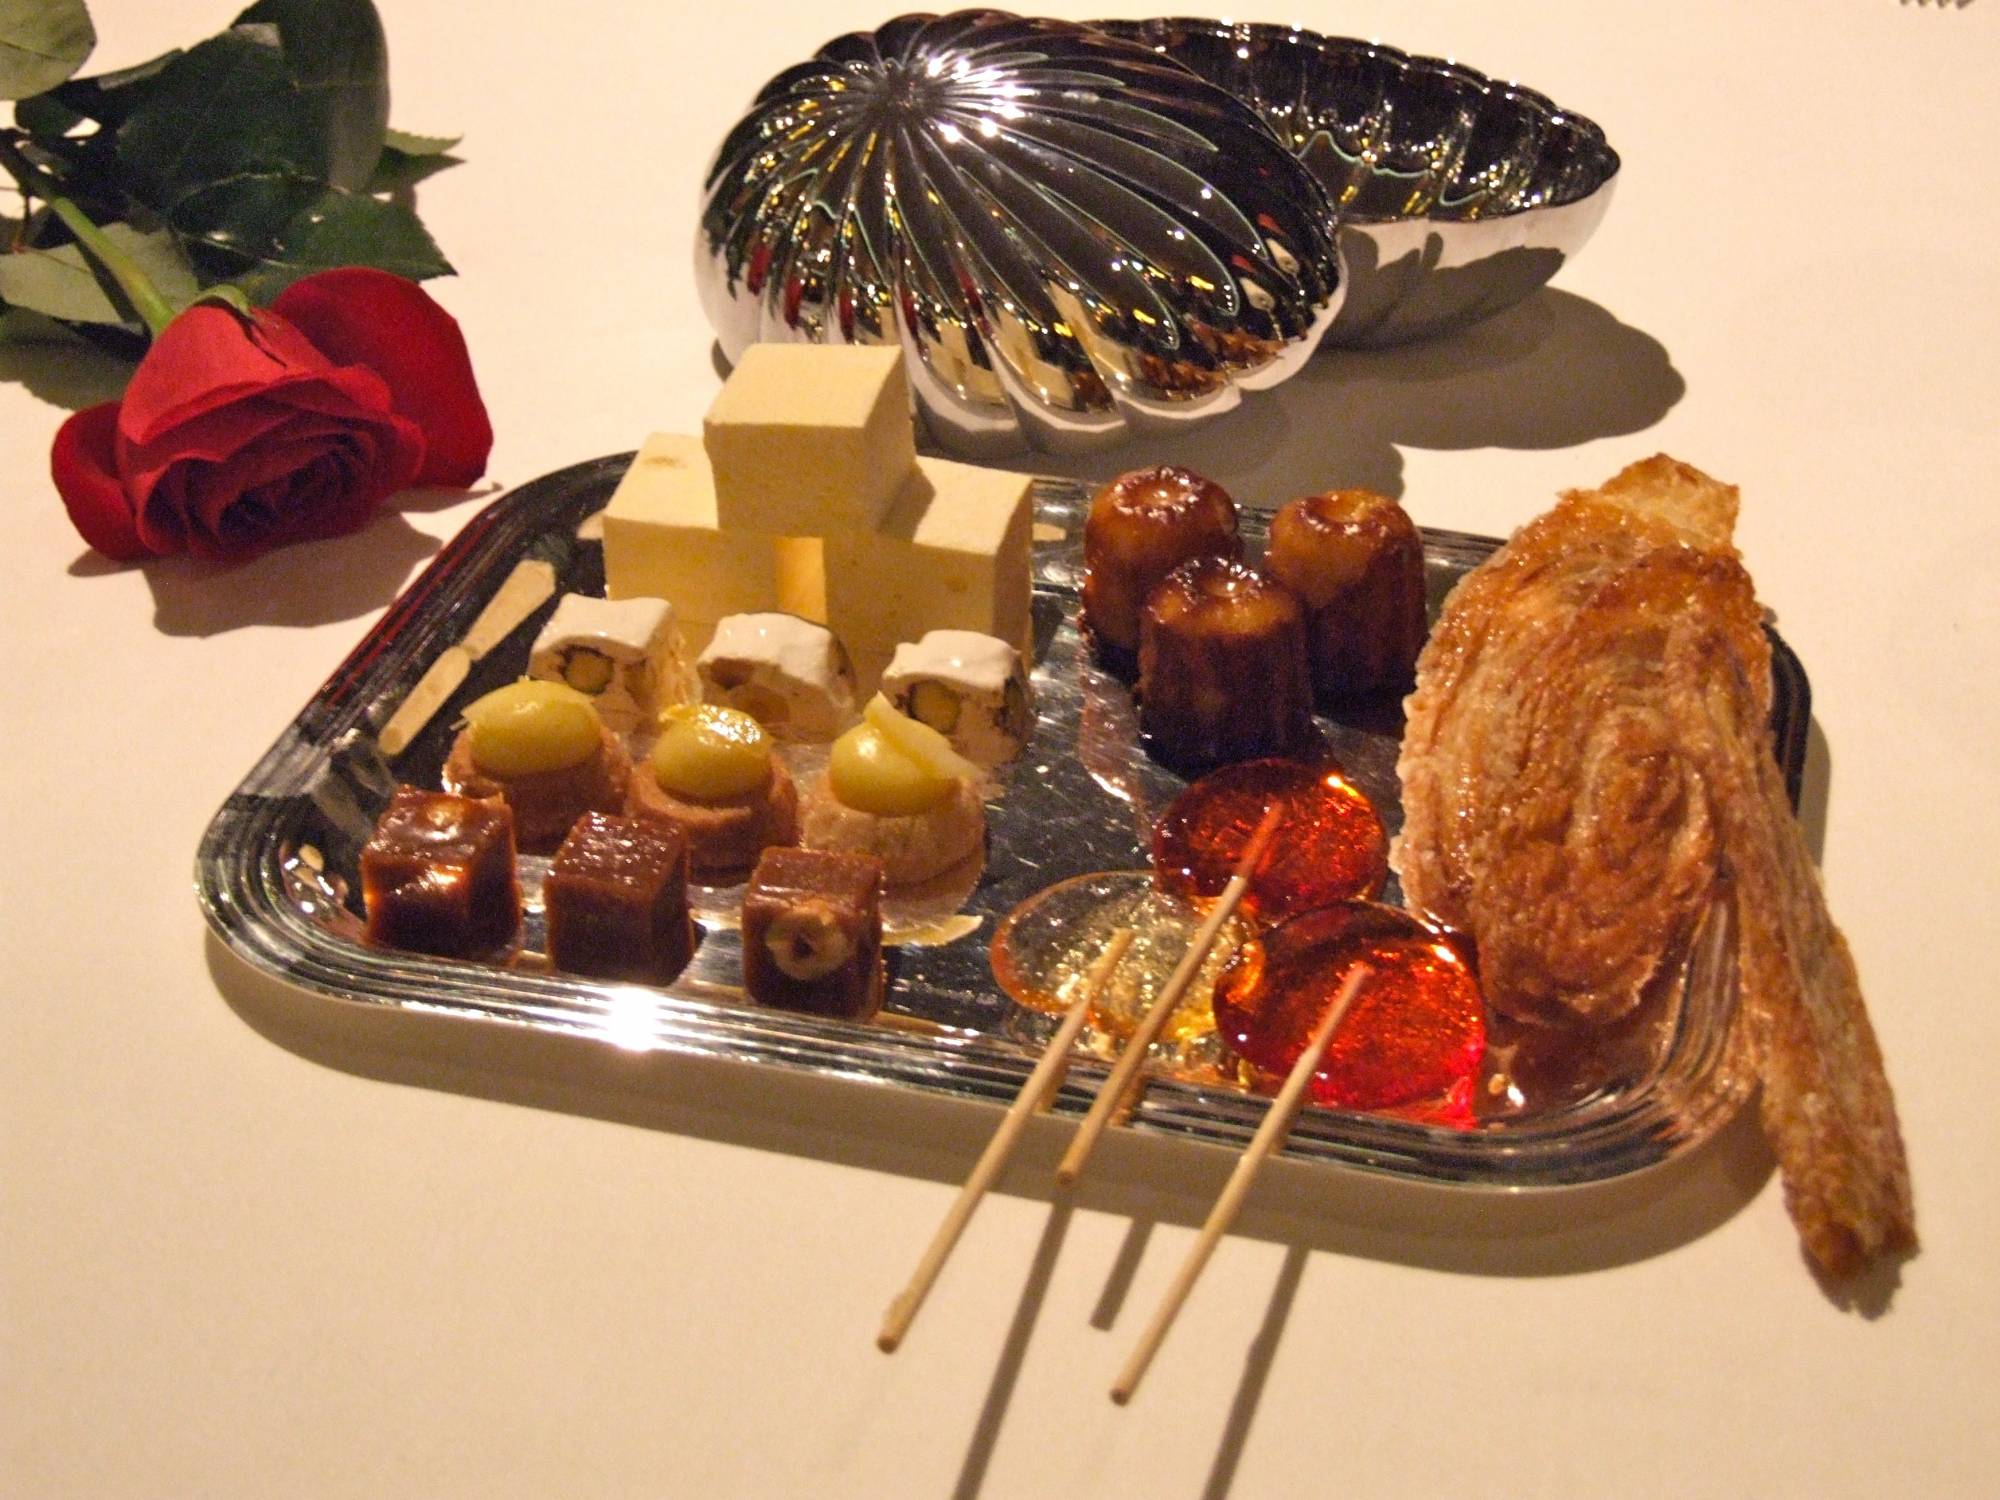 Remy - Friandises (the sweets that follow dessert)